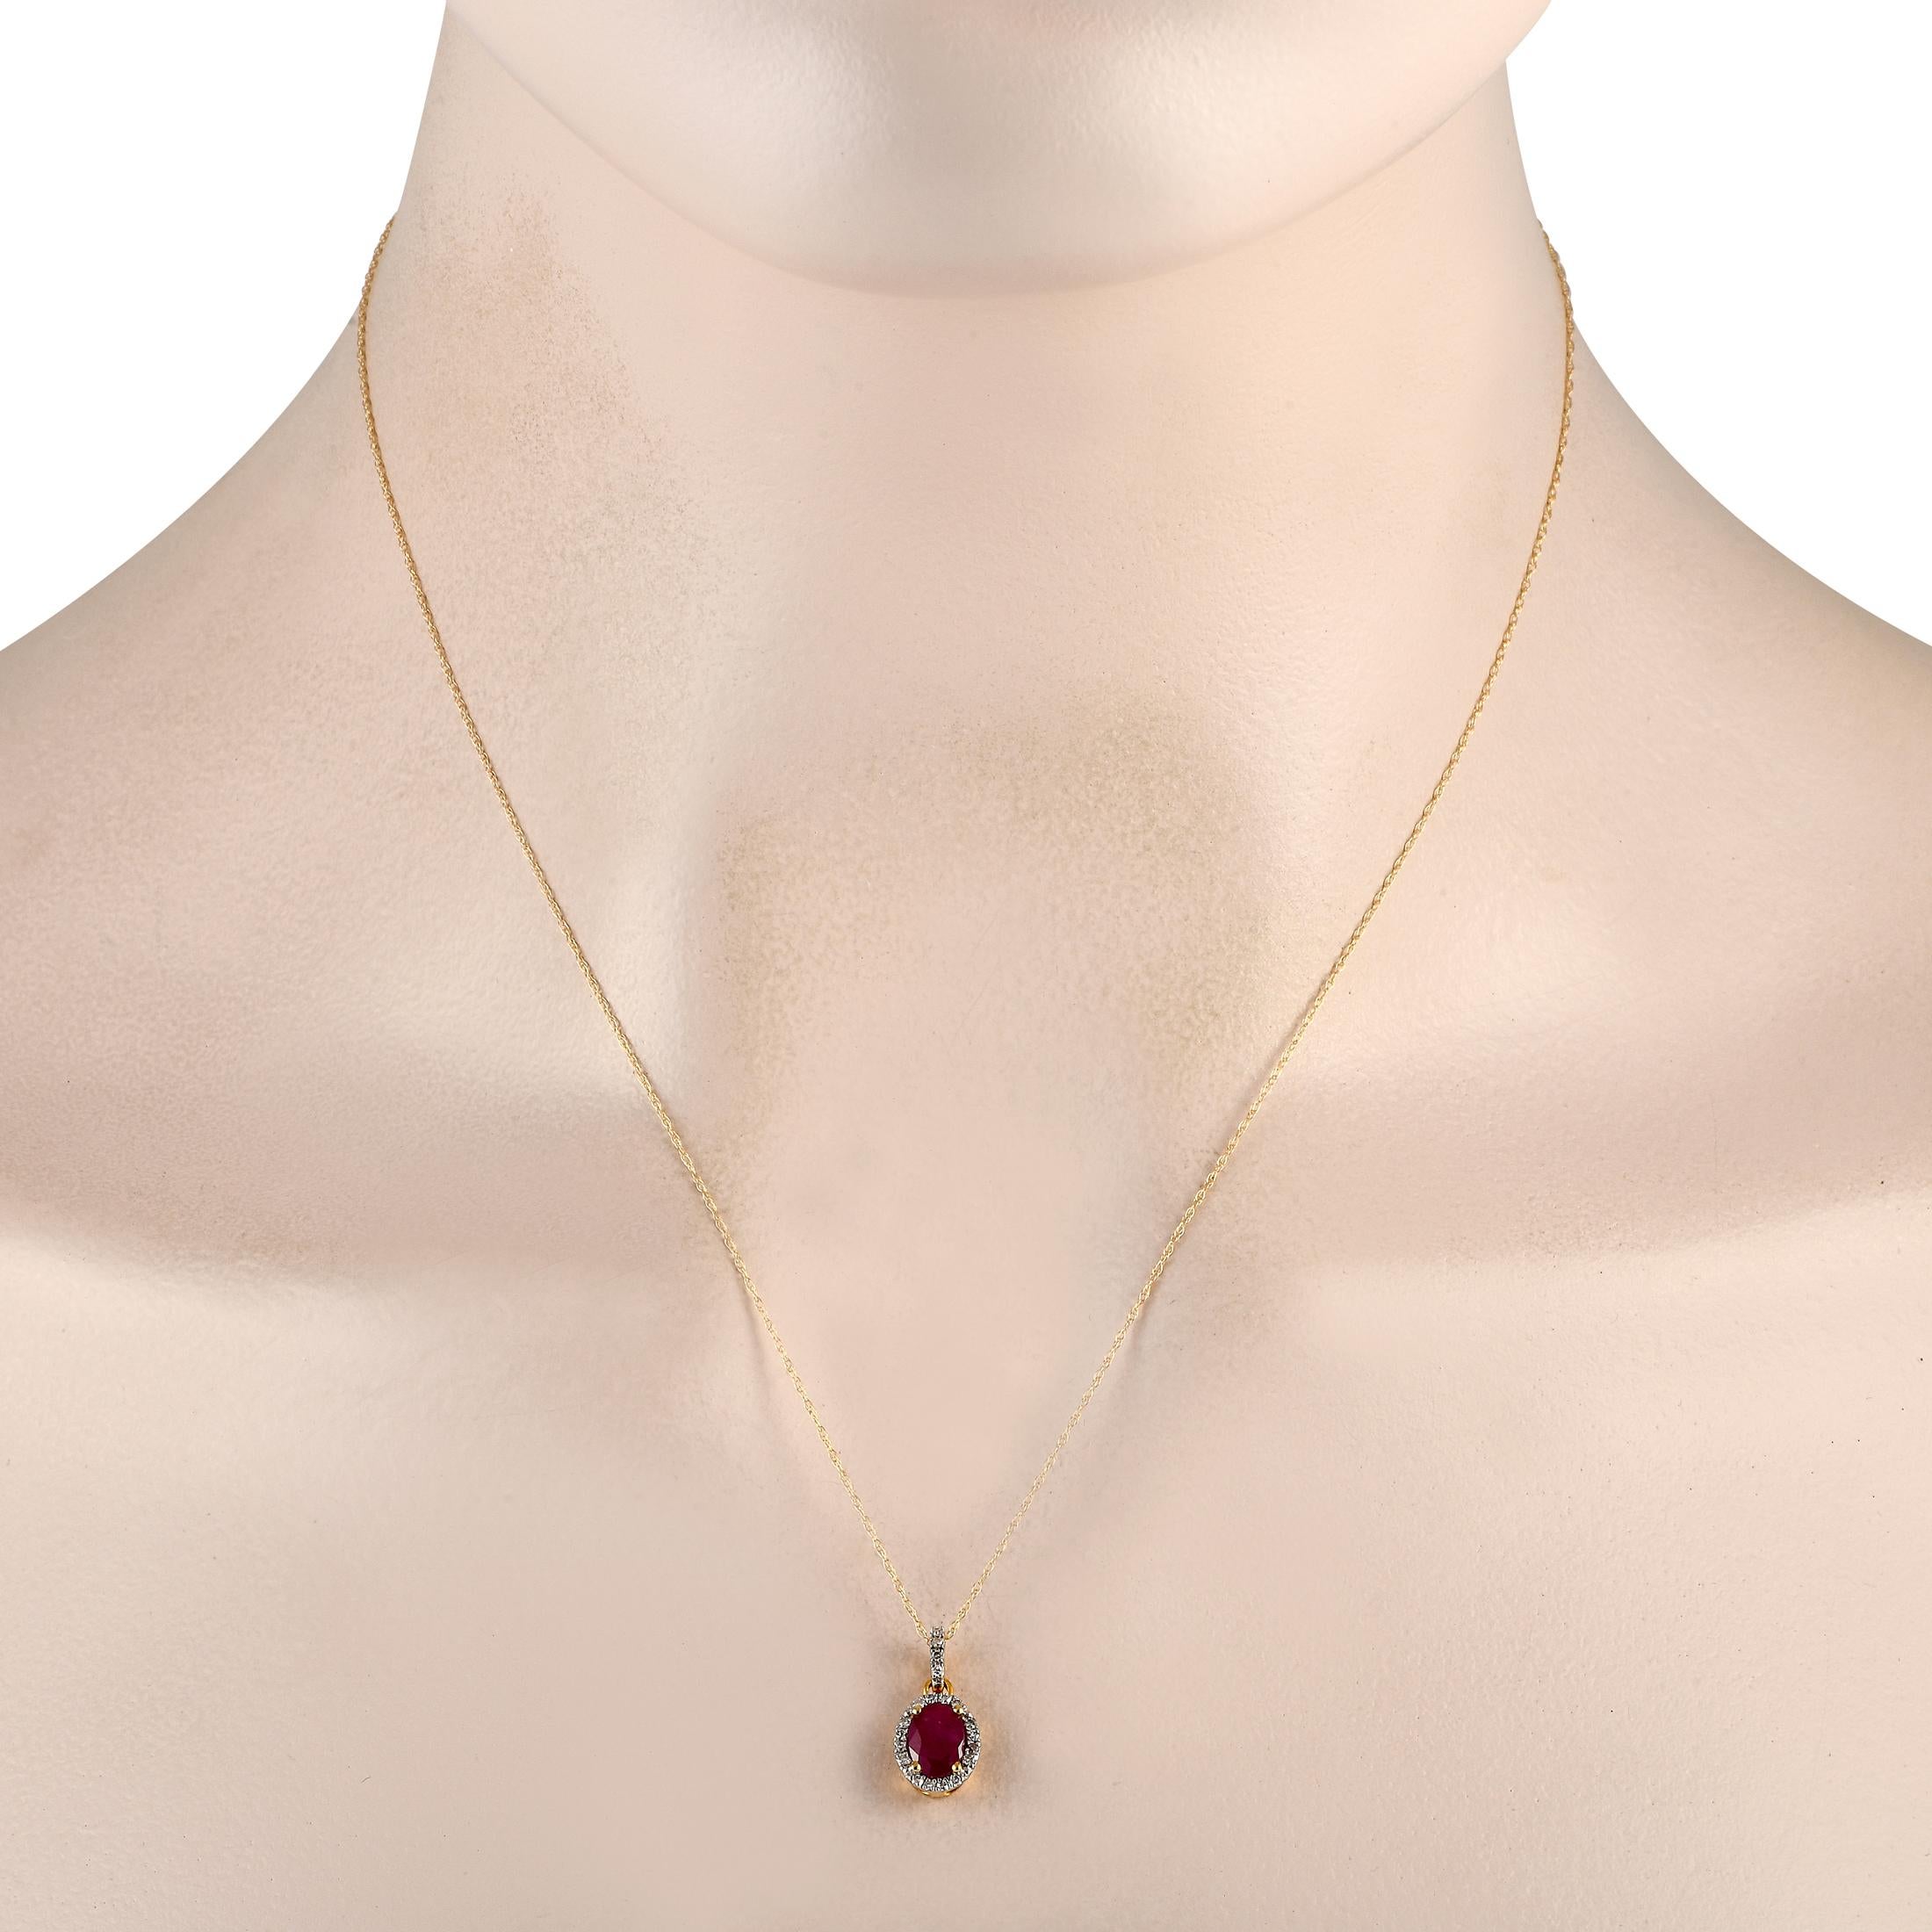 An oval Ruby center stone makes this necklace simply unforgettable. Simple and stylish, this pieces 14K Yellow Gold pendant measures 0.65 long by 0.25 wide. Its suspended from an 18 chain and includes sparkling Diamond accents totaling 0.10